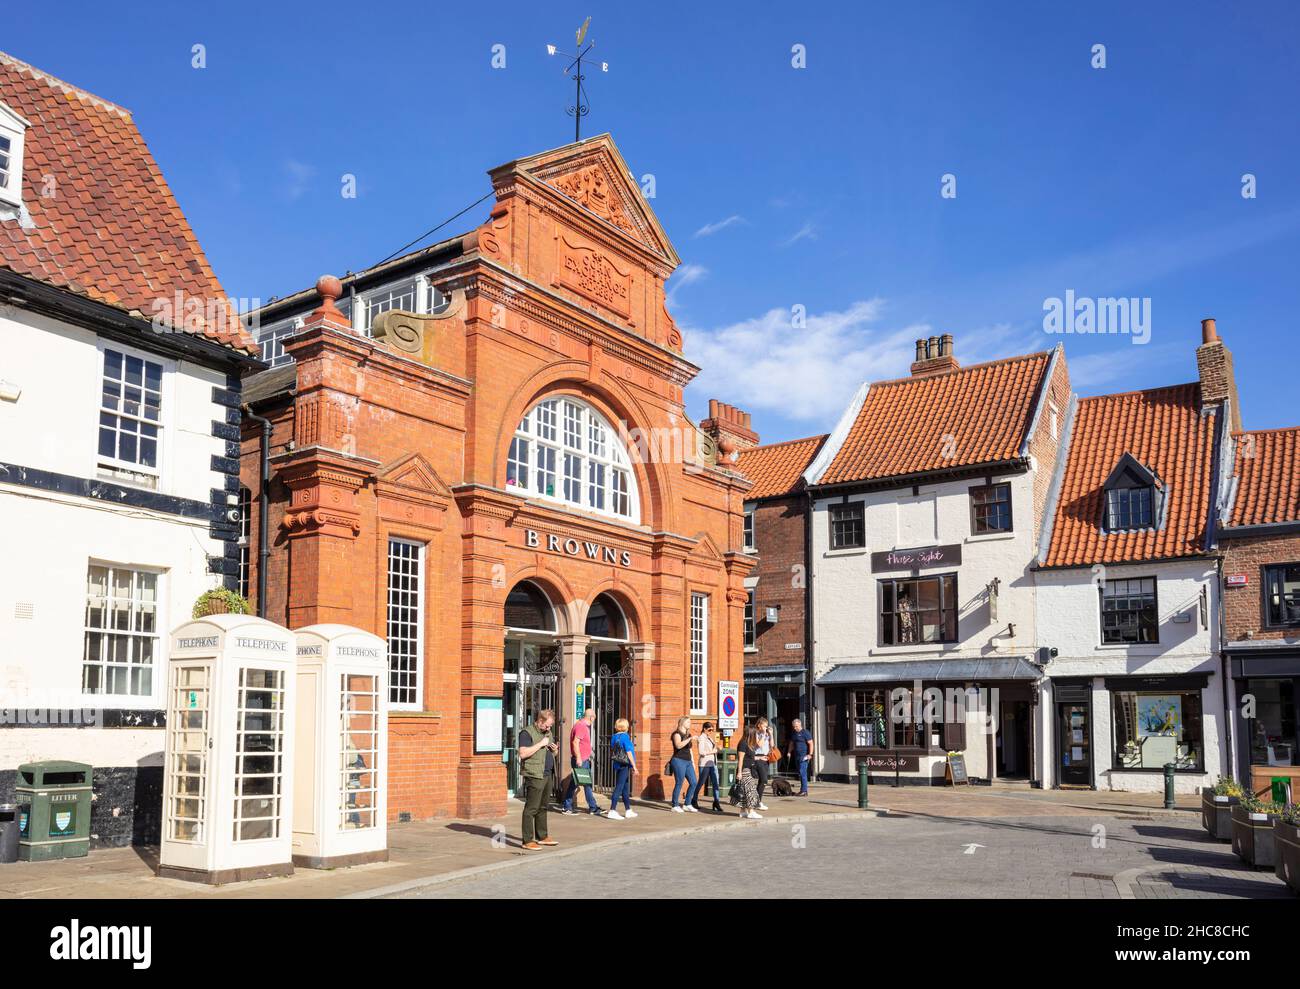 Browns Beverley department store The grapes pub and white telephone boxes in the Market town of Beverley Yorkshire East Riding of Yorkshire England UK Stock Photo